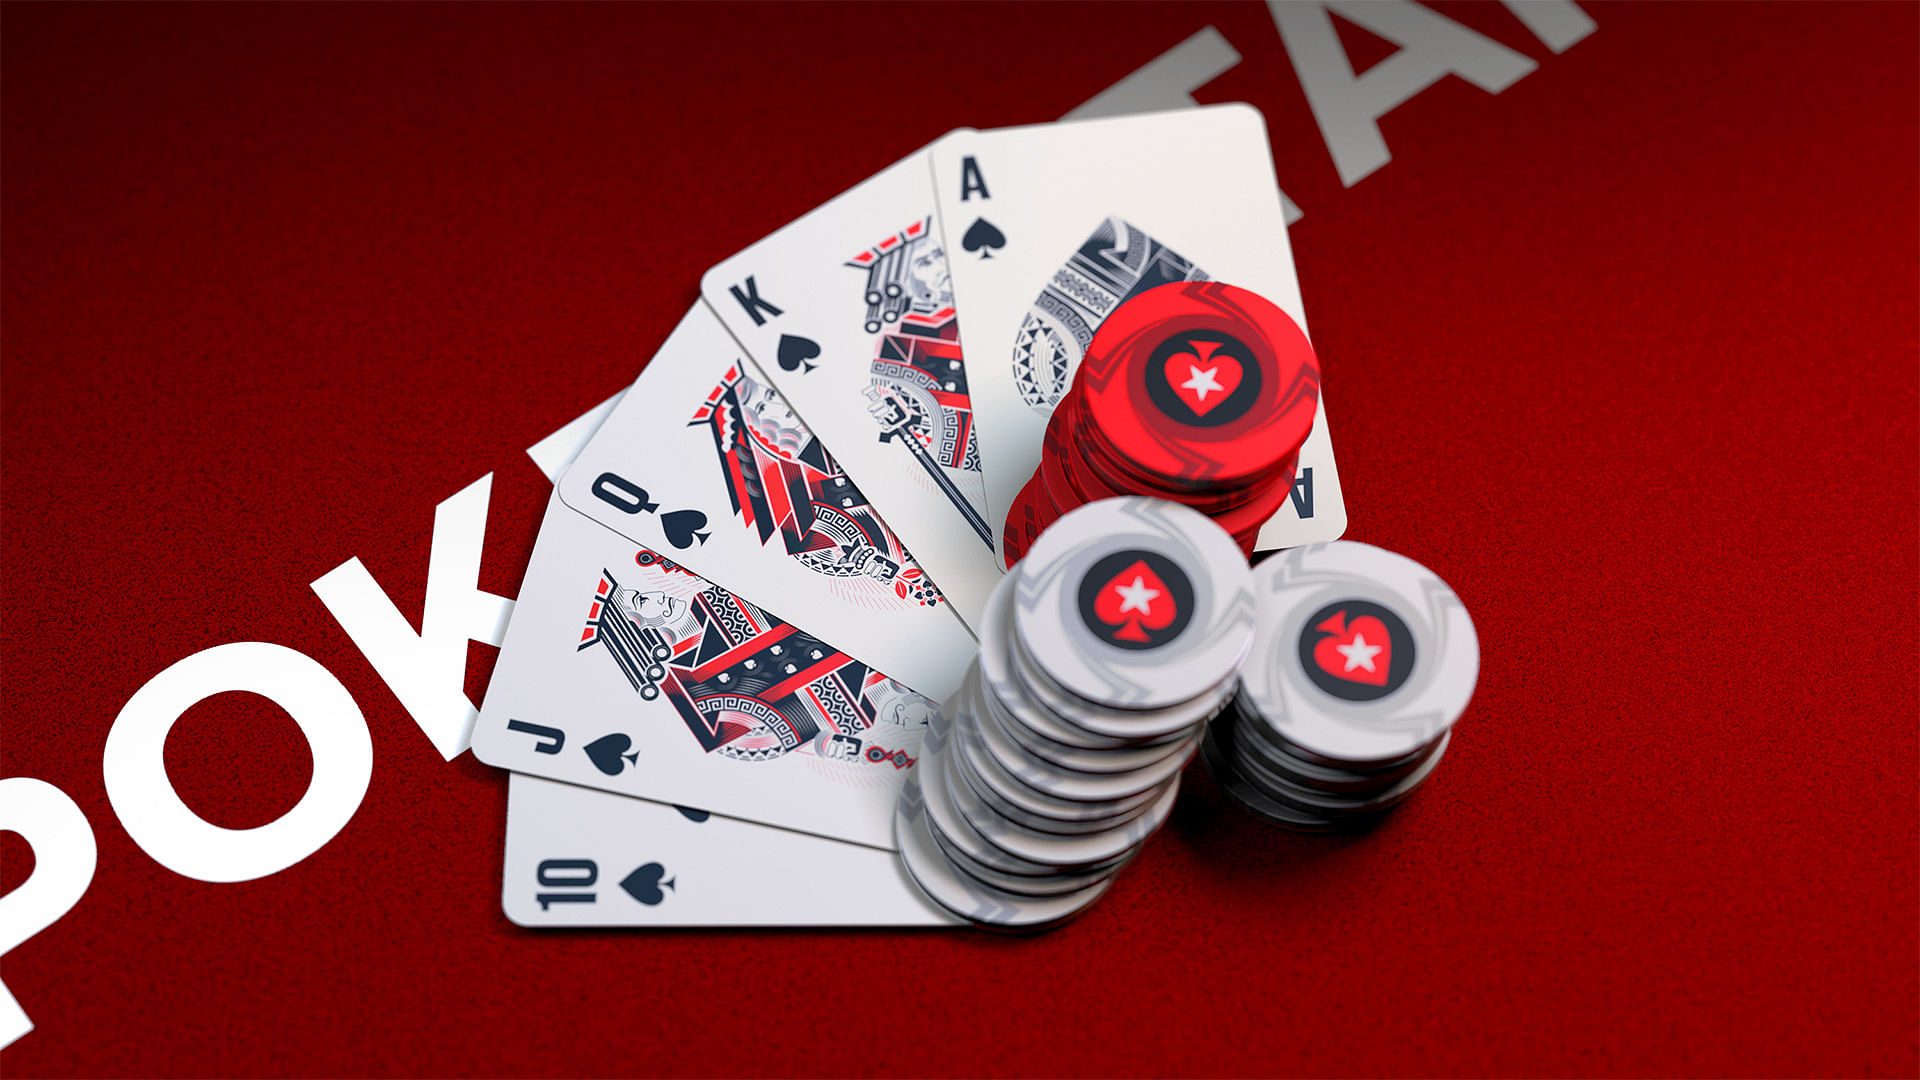 It’s time to unlock your poker skills, and there couldn’t have been a better time than Diwali.